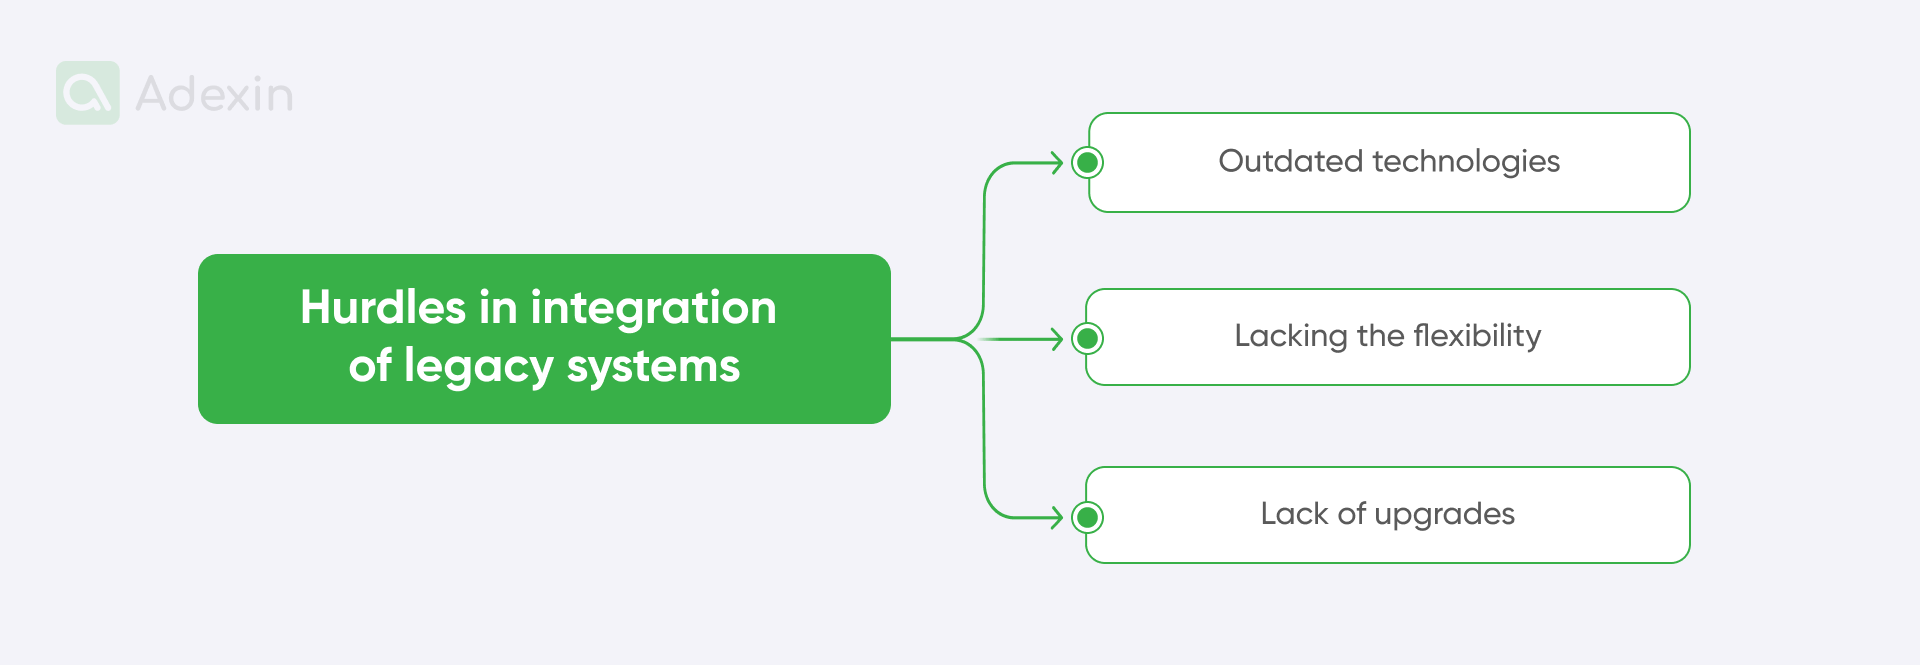 Hurdles of legacy systems integration